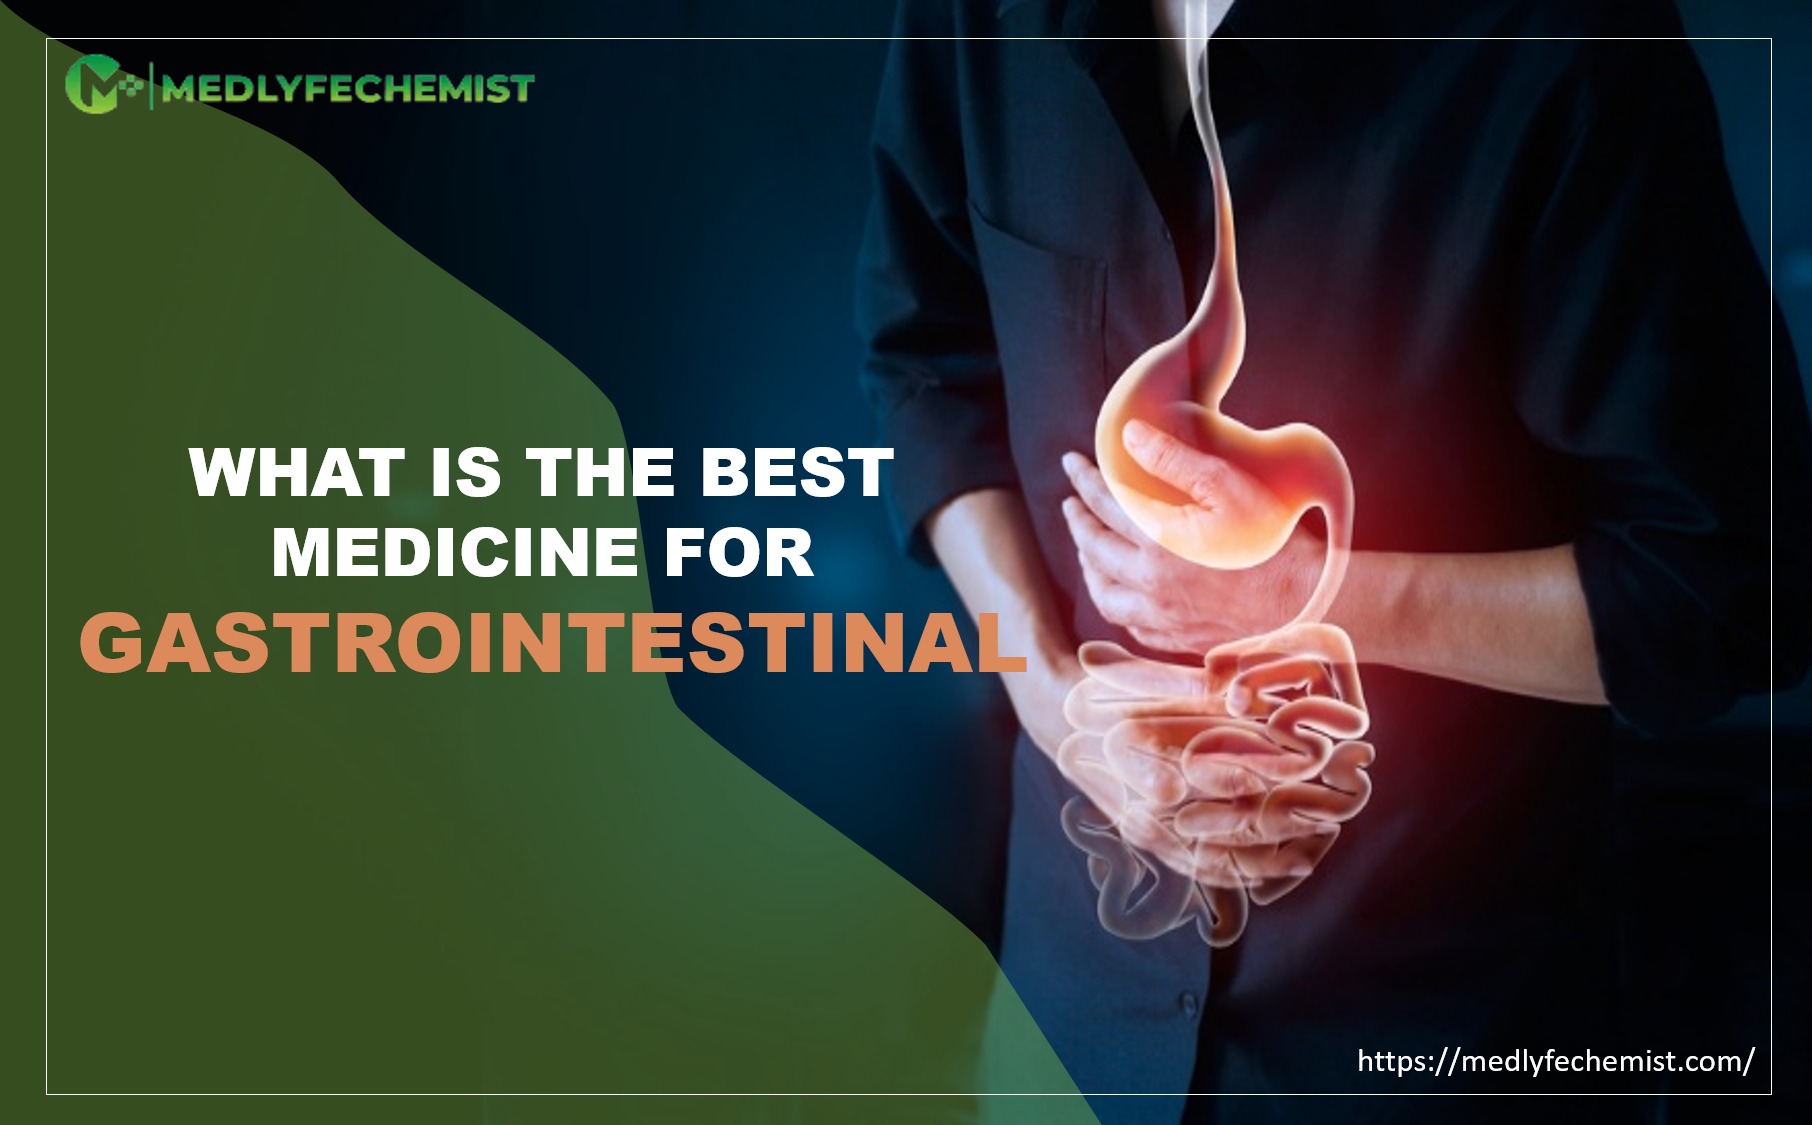 What is the best medicine for gastrointestinal?